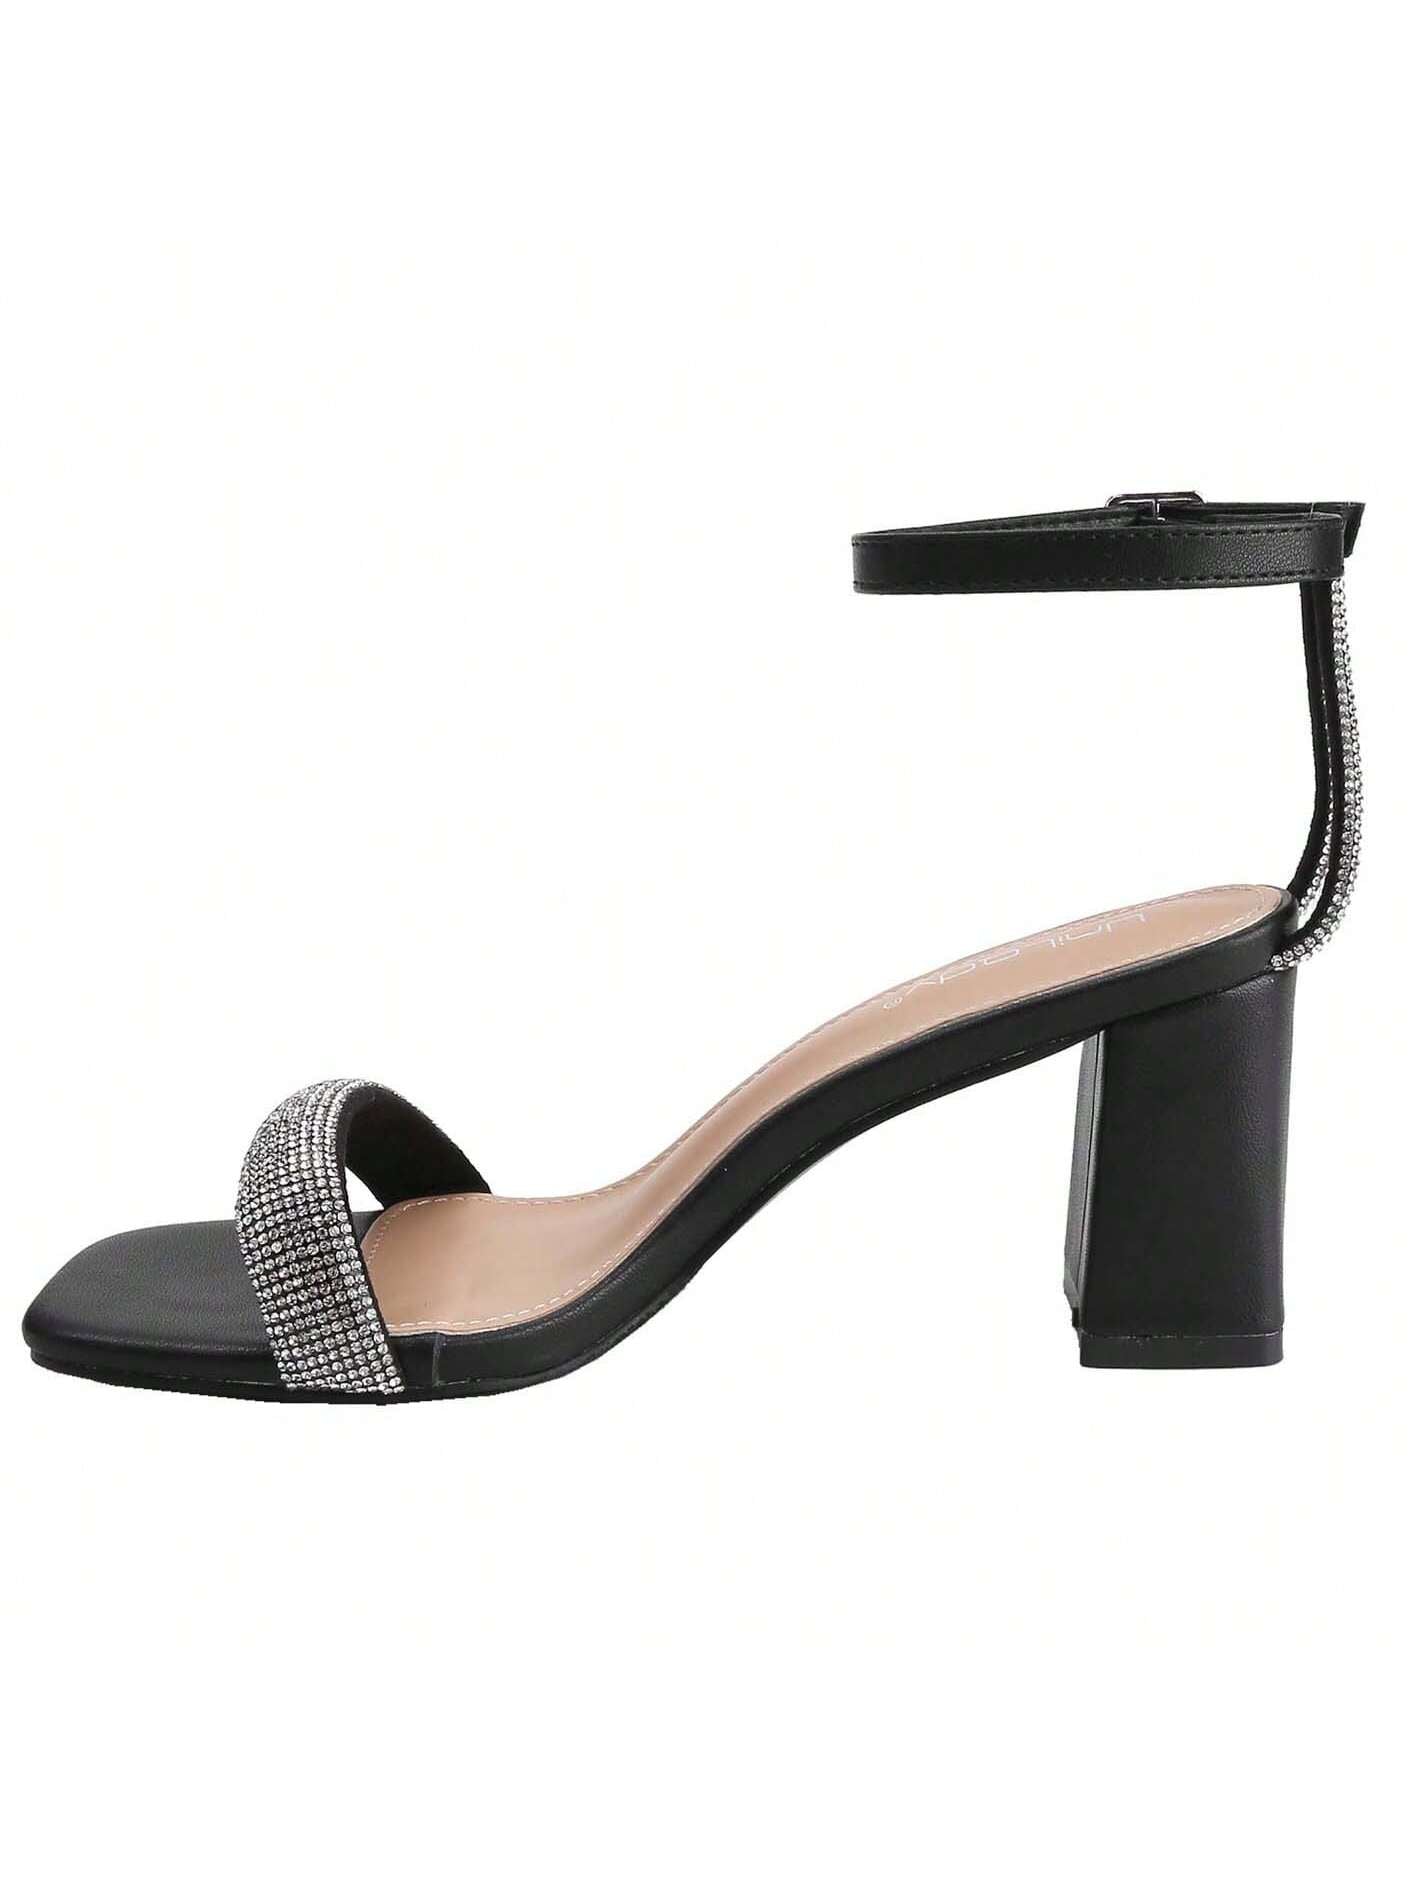 Chic and Comfortable Women's Chunky Heels with Ankle Strap – The Perfect Dress Shoes for All Occasionss